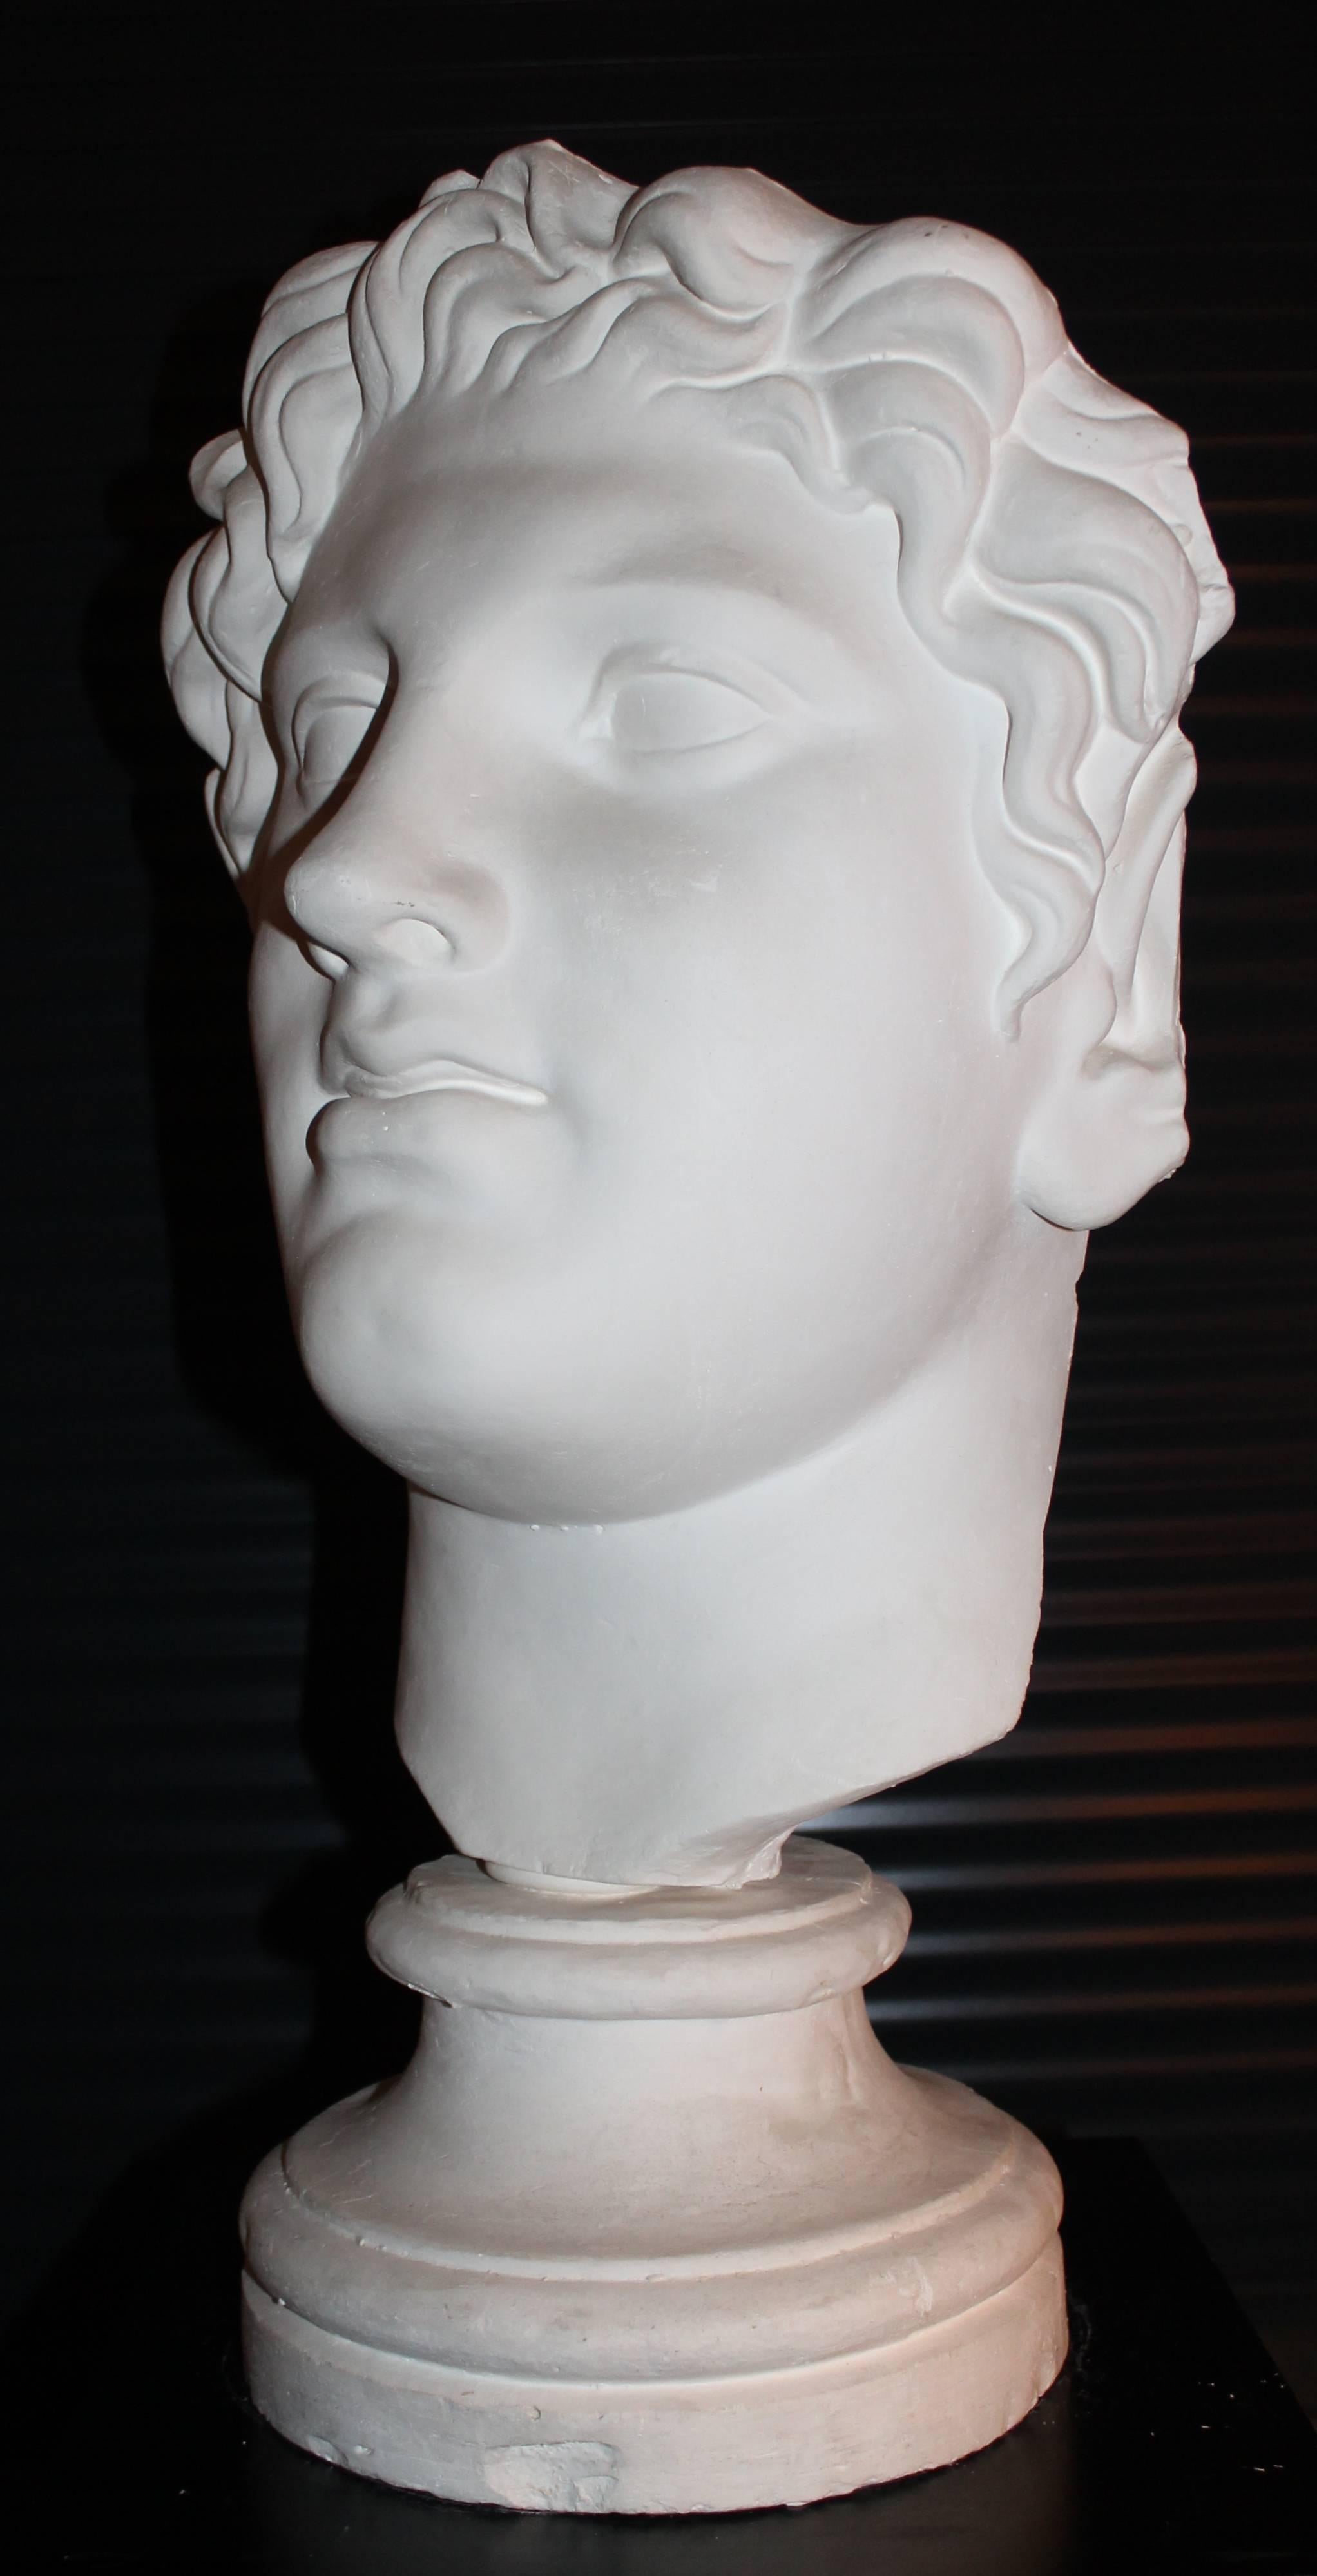 Head of a young faun on a base, in stucco, Italy, 1960s.
Signed (not readable).